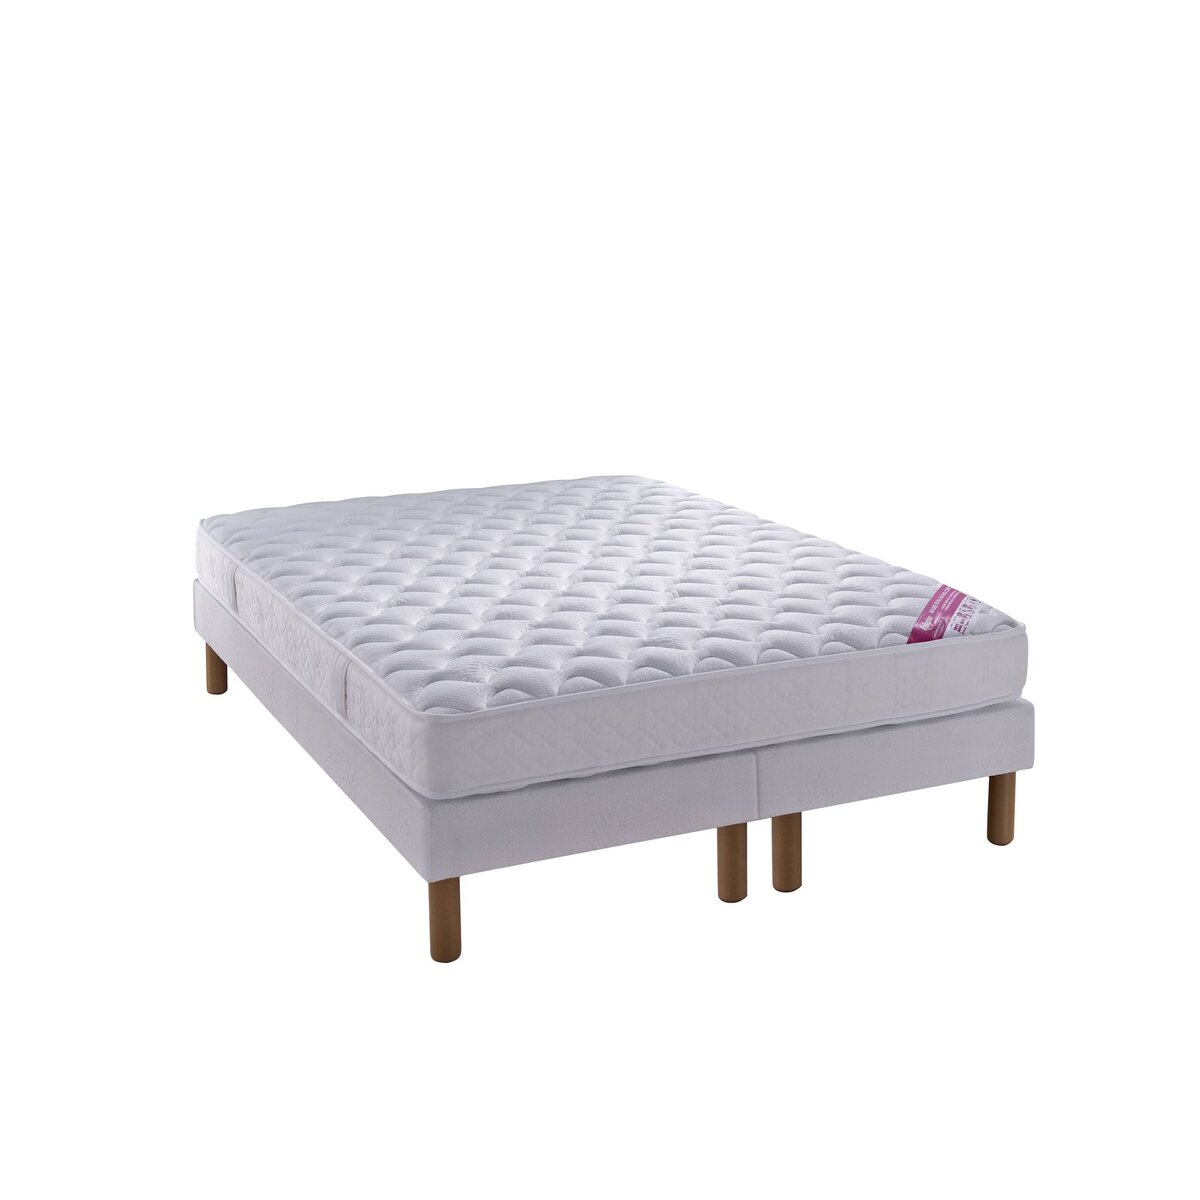 RELAXIMA LUXE MAXI CONFORT : matelas mousse DUNLOPILLO 160x200 + 2 sommiers tapissiers 80x200 + pieds